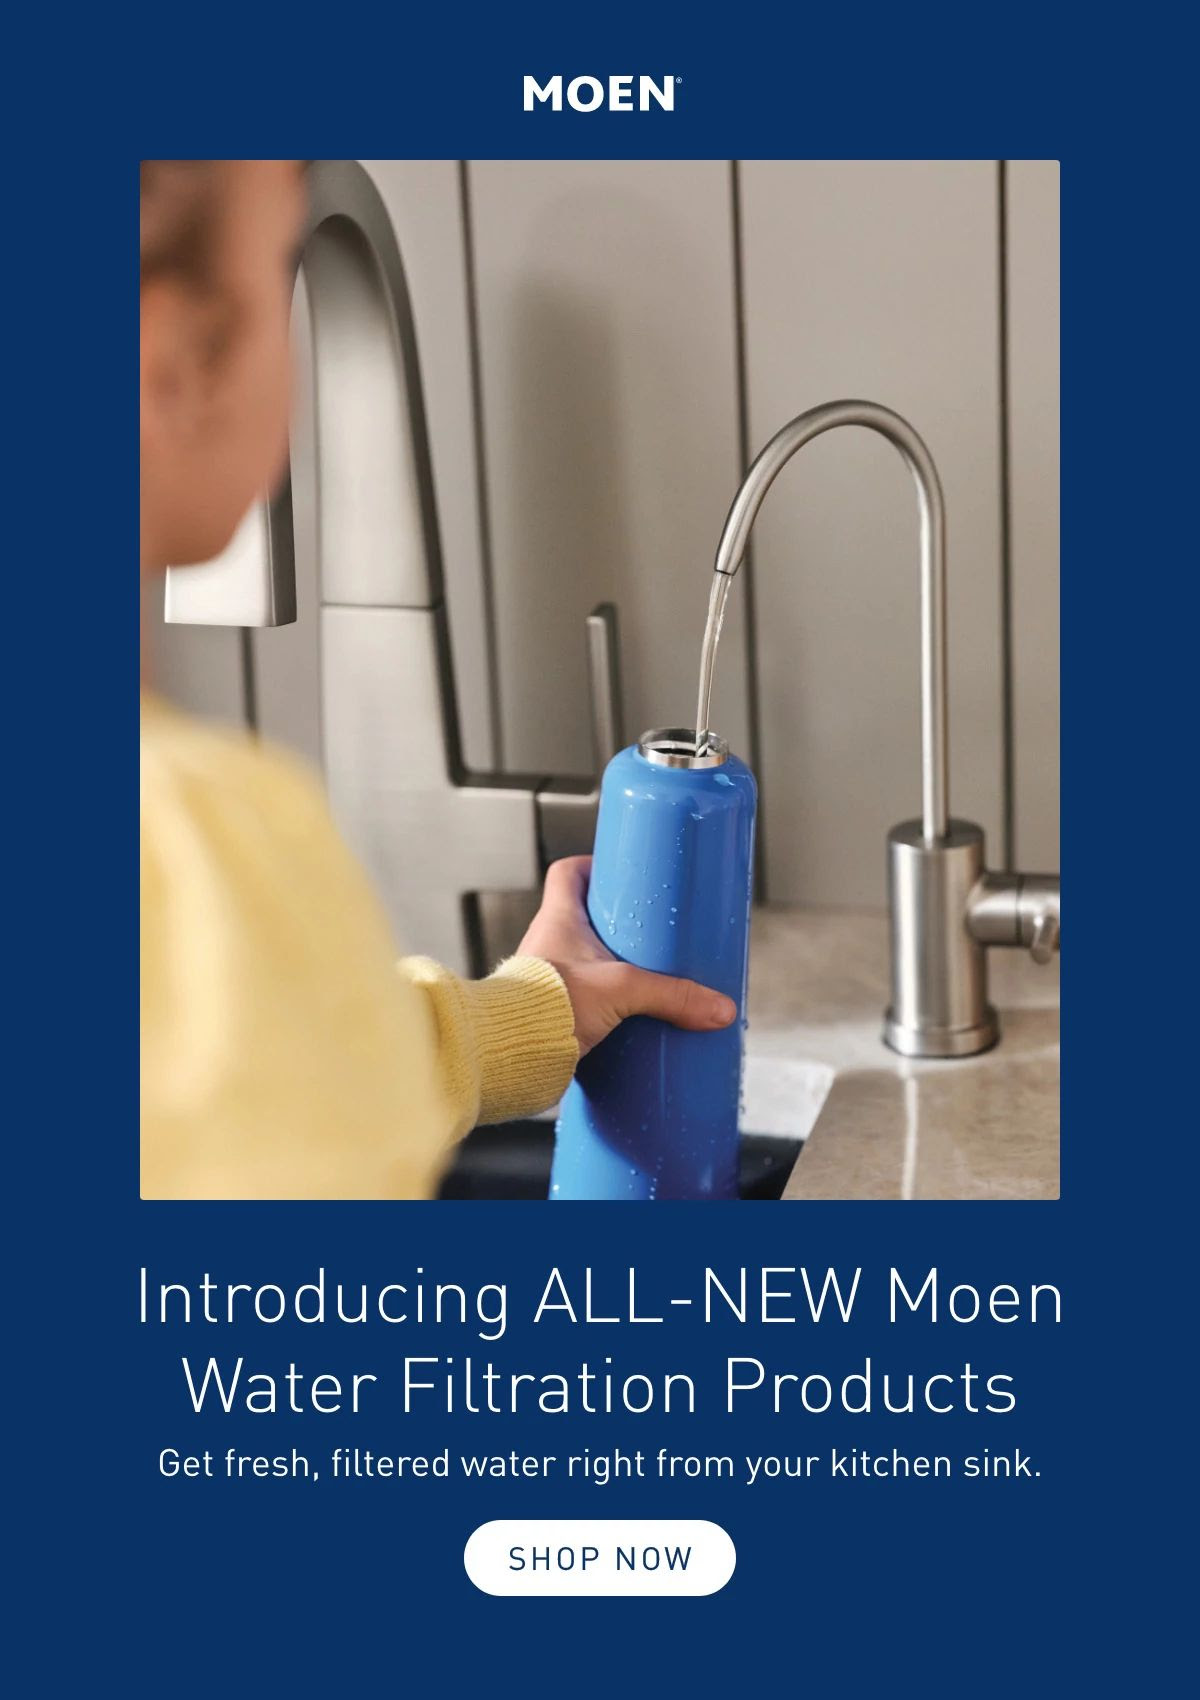 Introducing All-New Moen Water Filtration Products